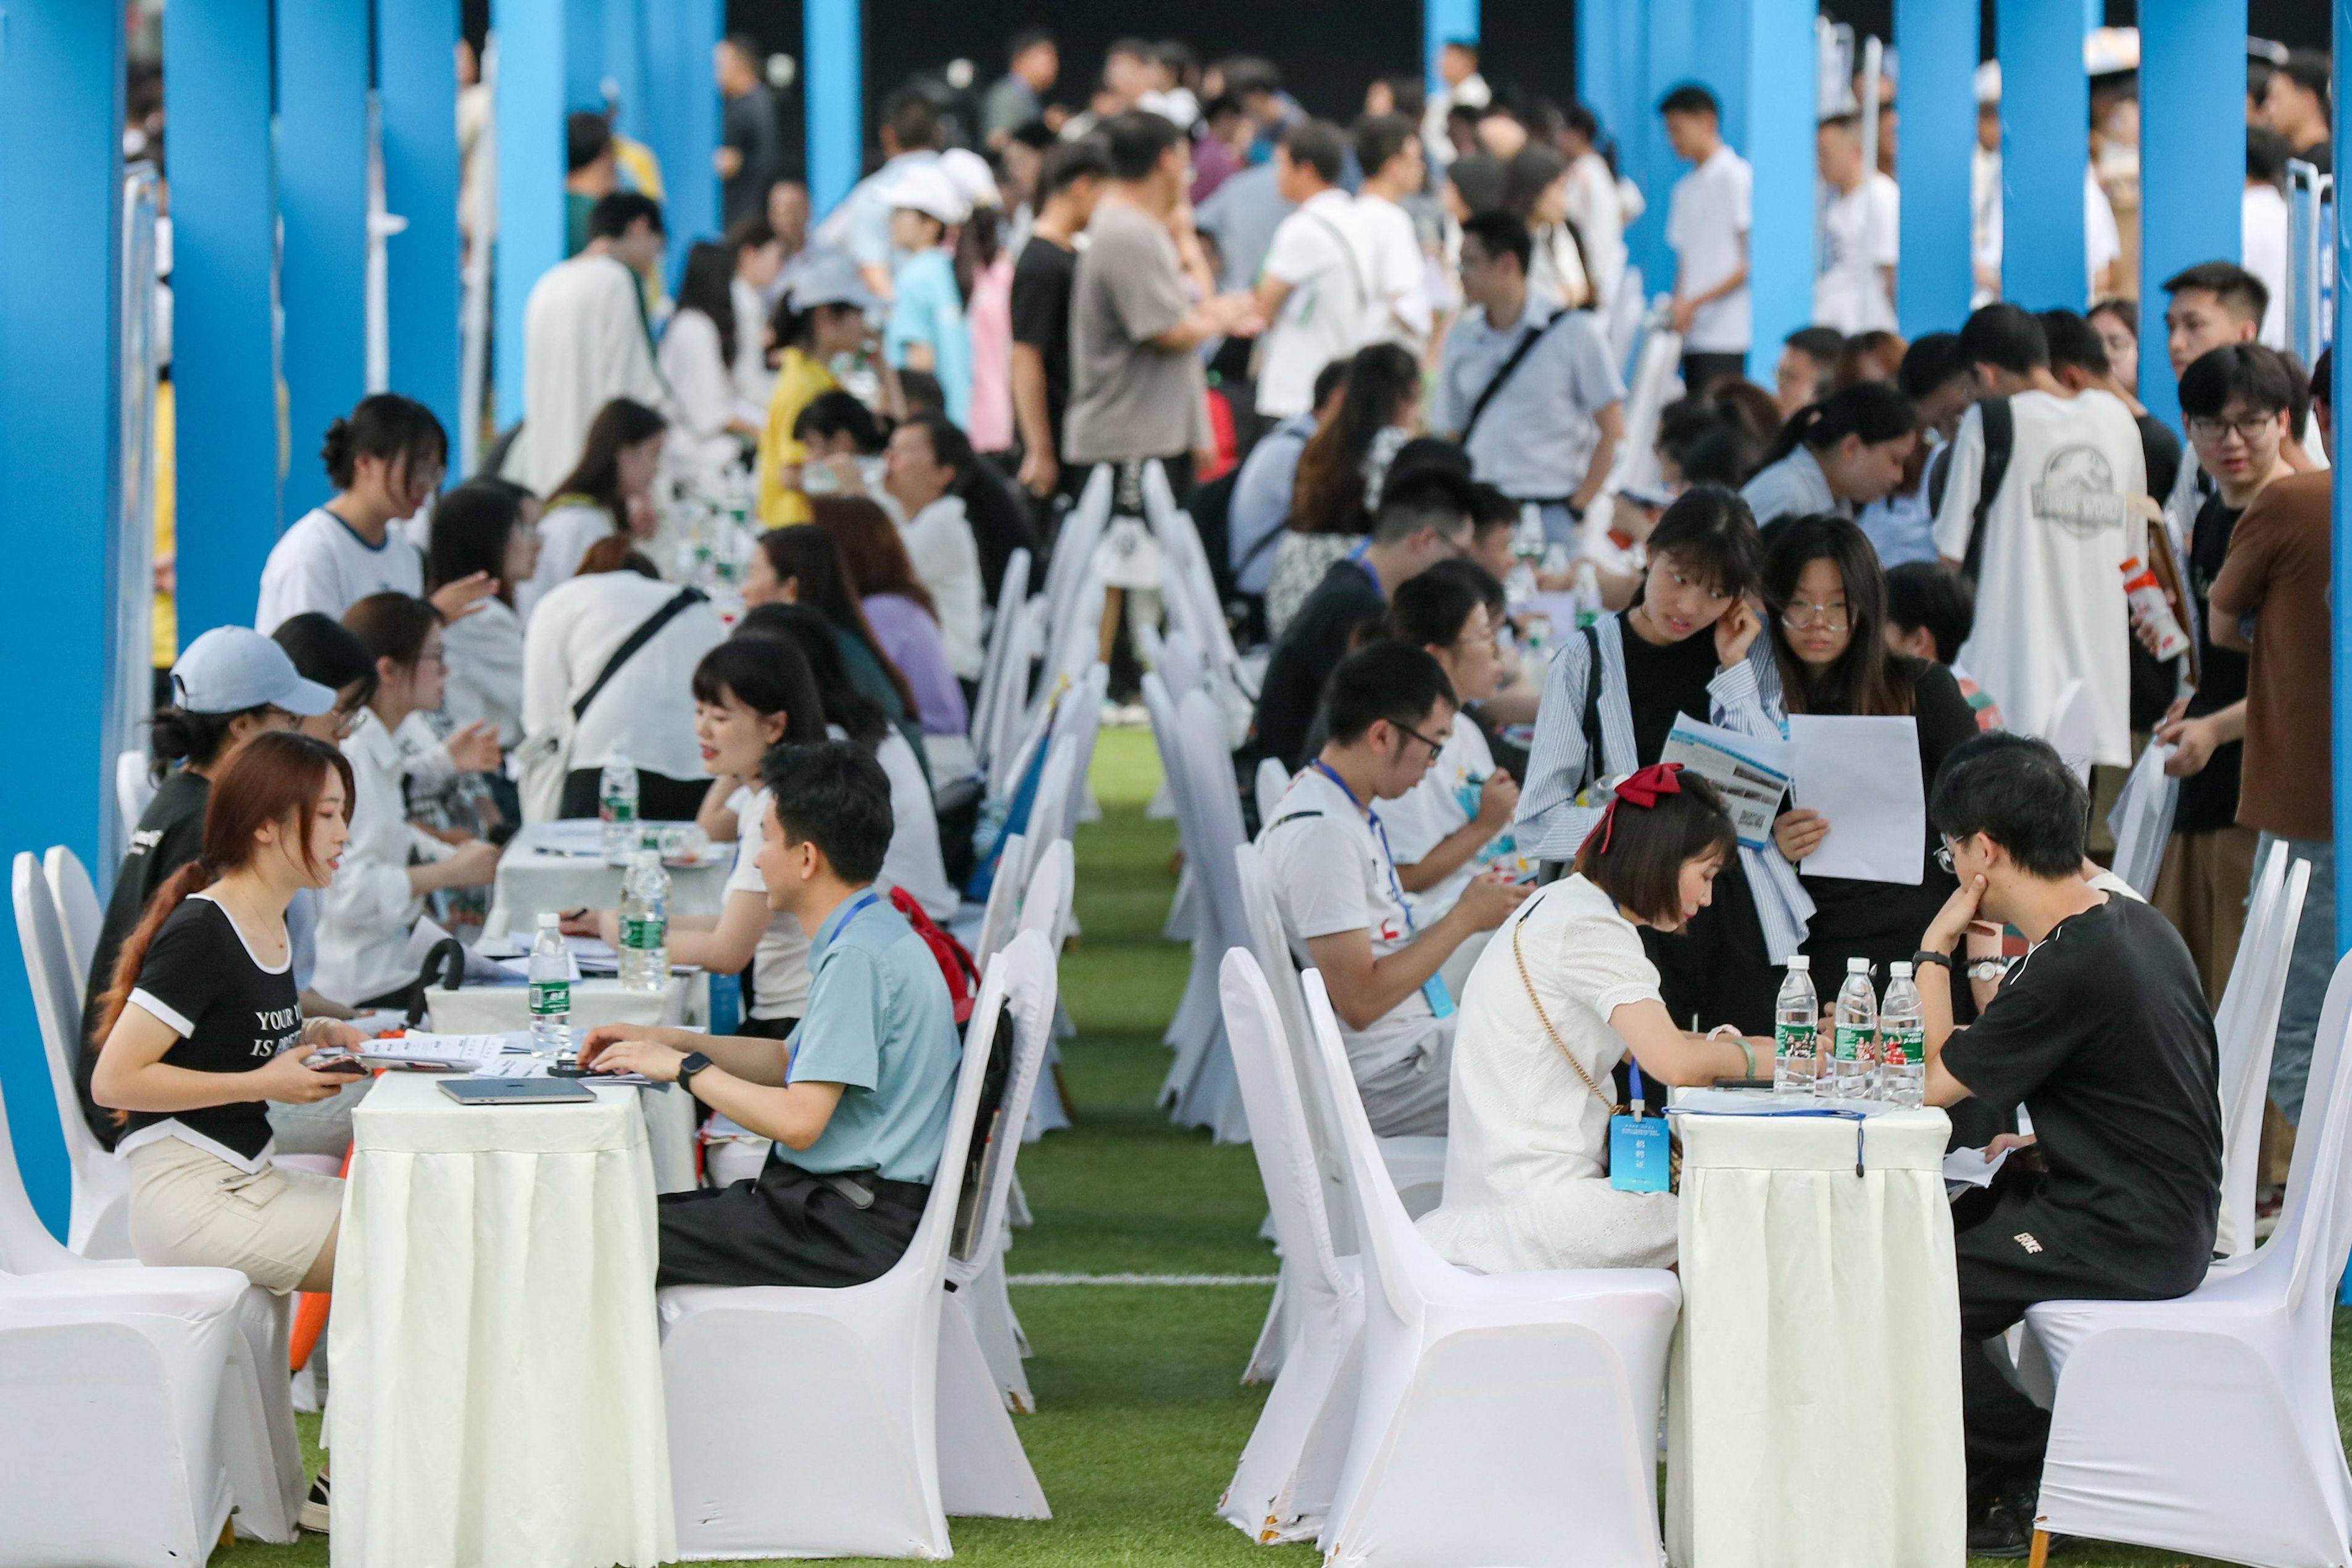 University graduates attend a job fair in Yibin, in China’s southwestern Sichuan province, on June 14. The rise of jobless young people in China is less concerning when compared to OECD countries like Spain, Italy and Sweden, where youth unemployment rates have hovered around 20 per cent for many years. Photo: AFP